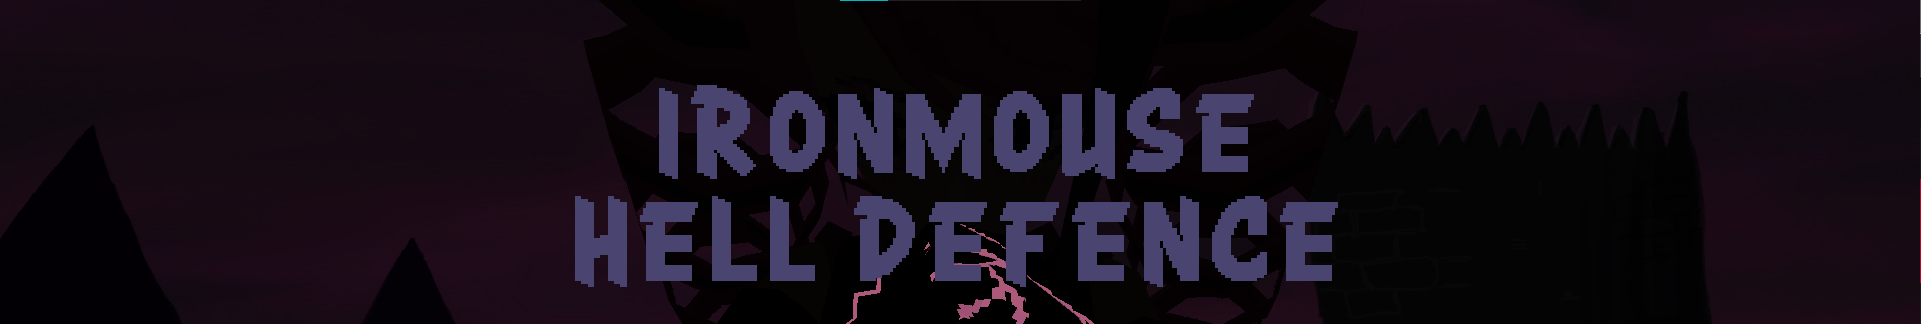 Ironmouse Hell Defence